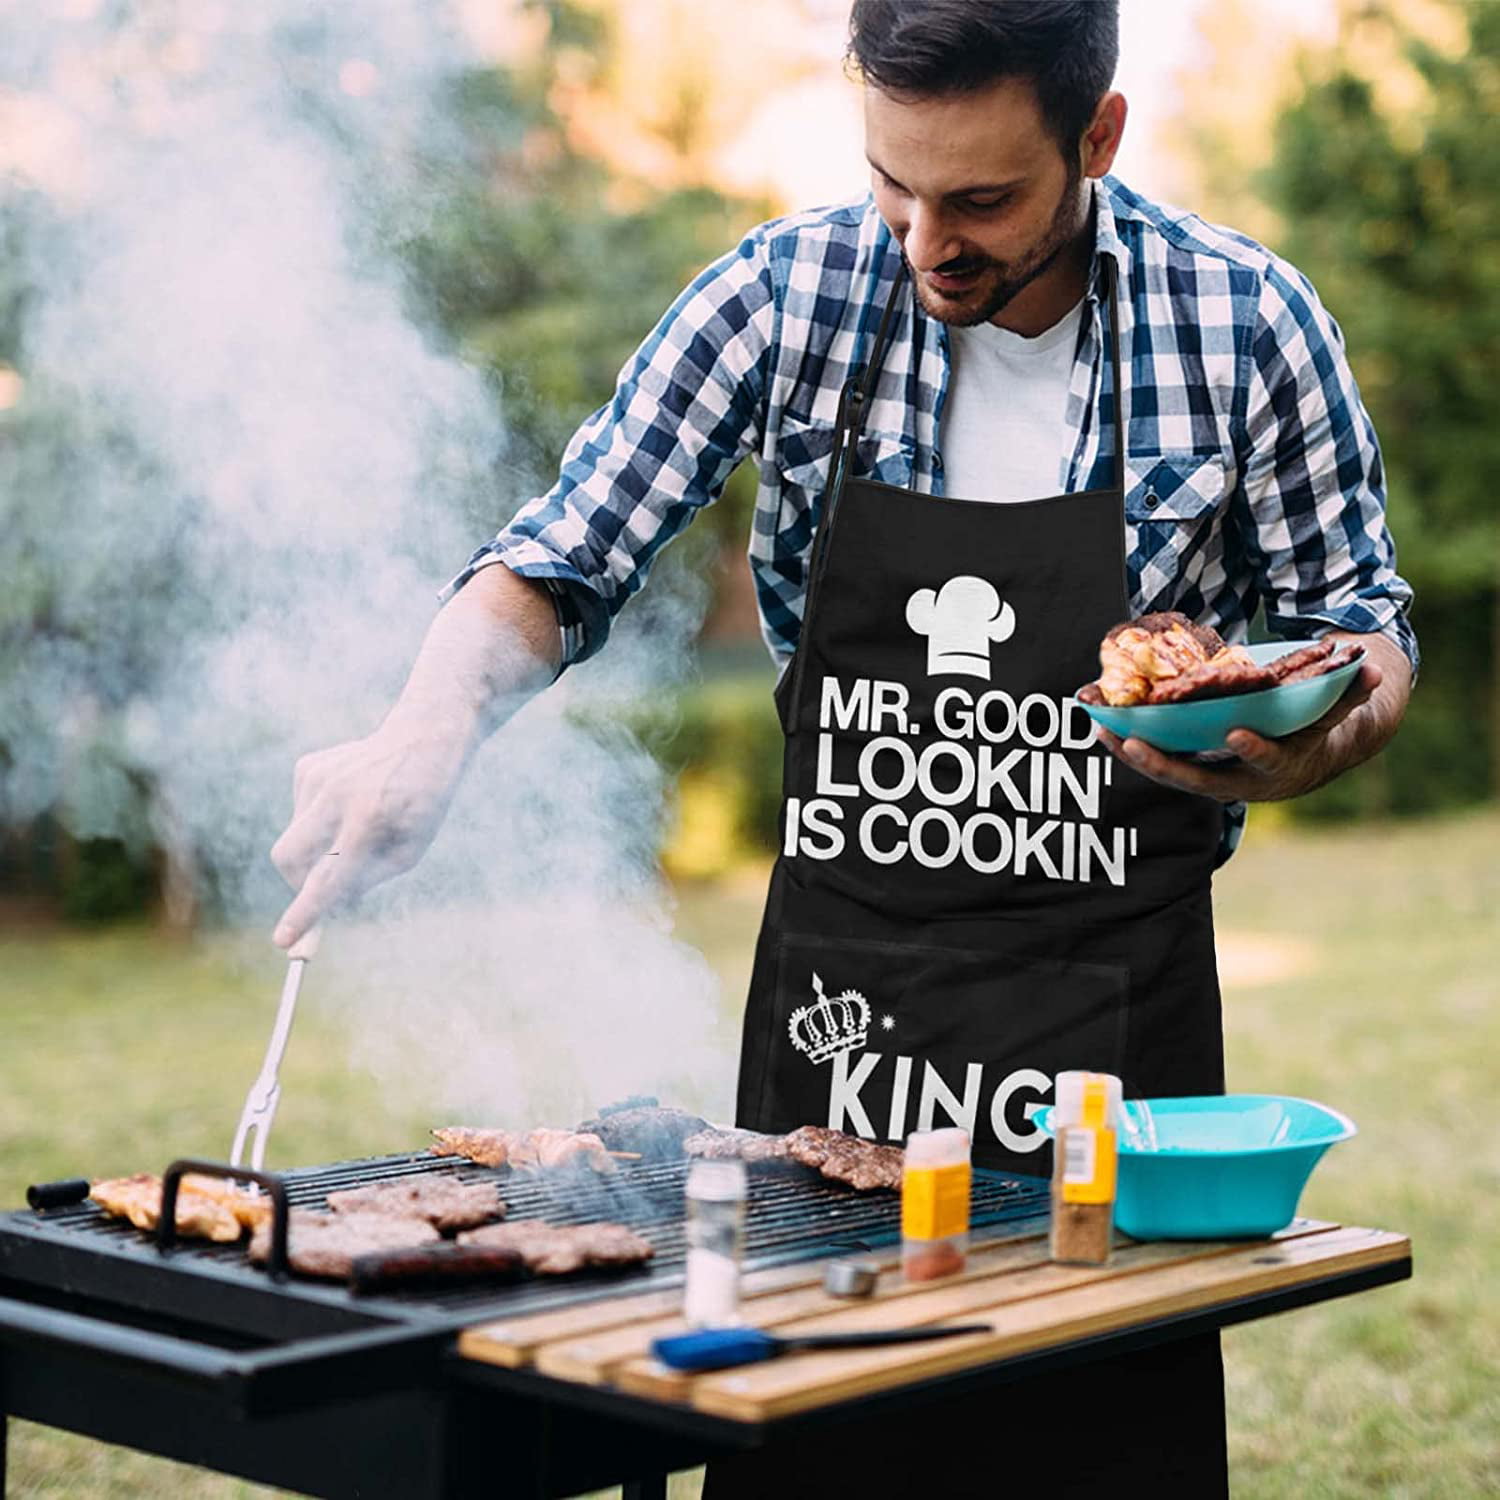  LONGESISM Kitchen Grill BBQ Cooking Apron Chef is Always  Right+Fun Chef Cooking Apron Cooking is My Language Christmas Stocking  Stuffers Gifts for Men Husband Father Gift Idea : Home & Kitchen